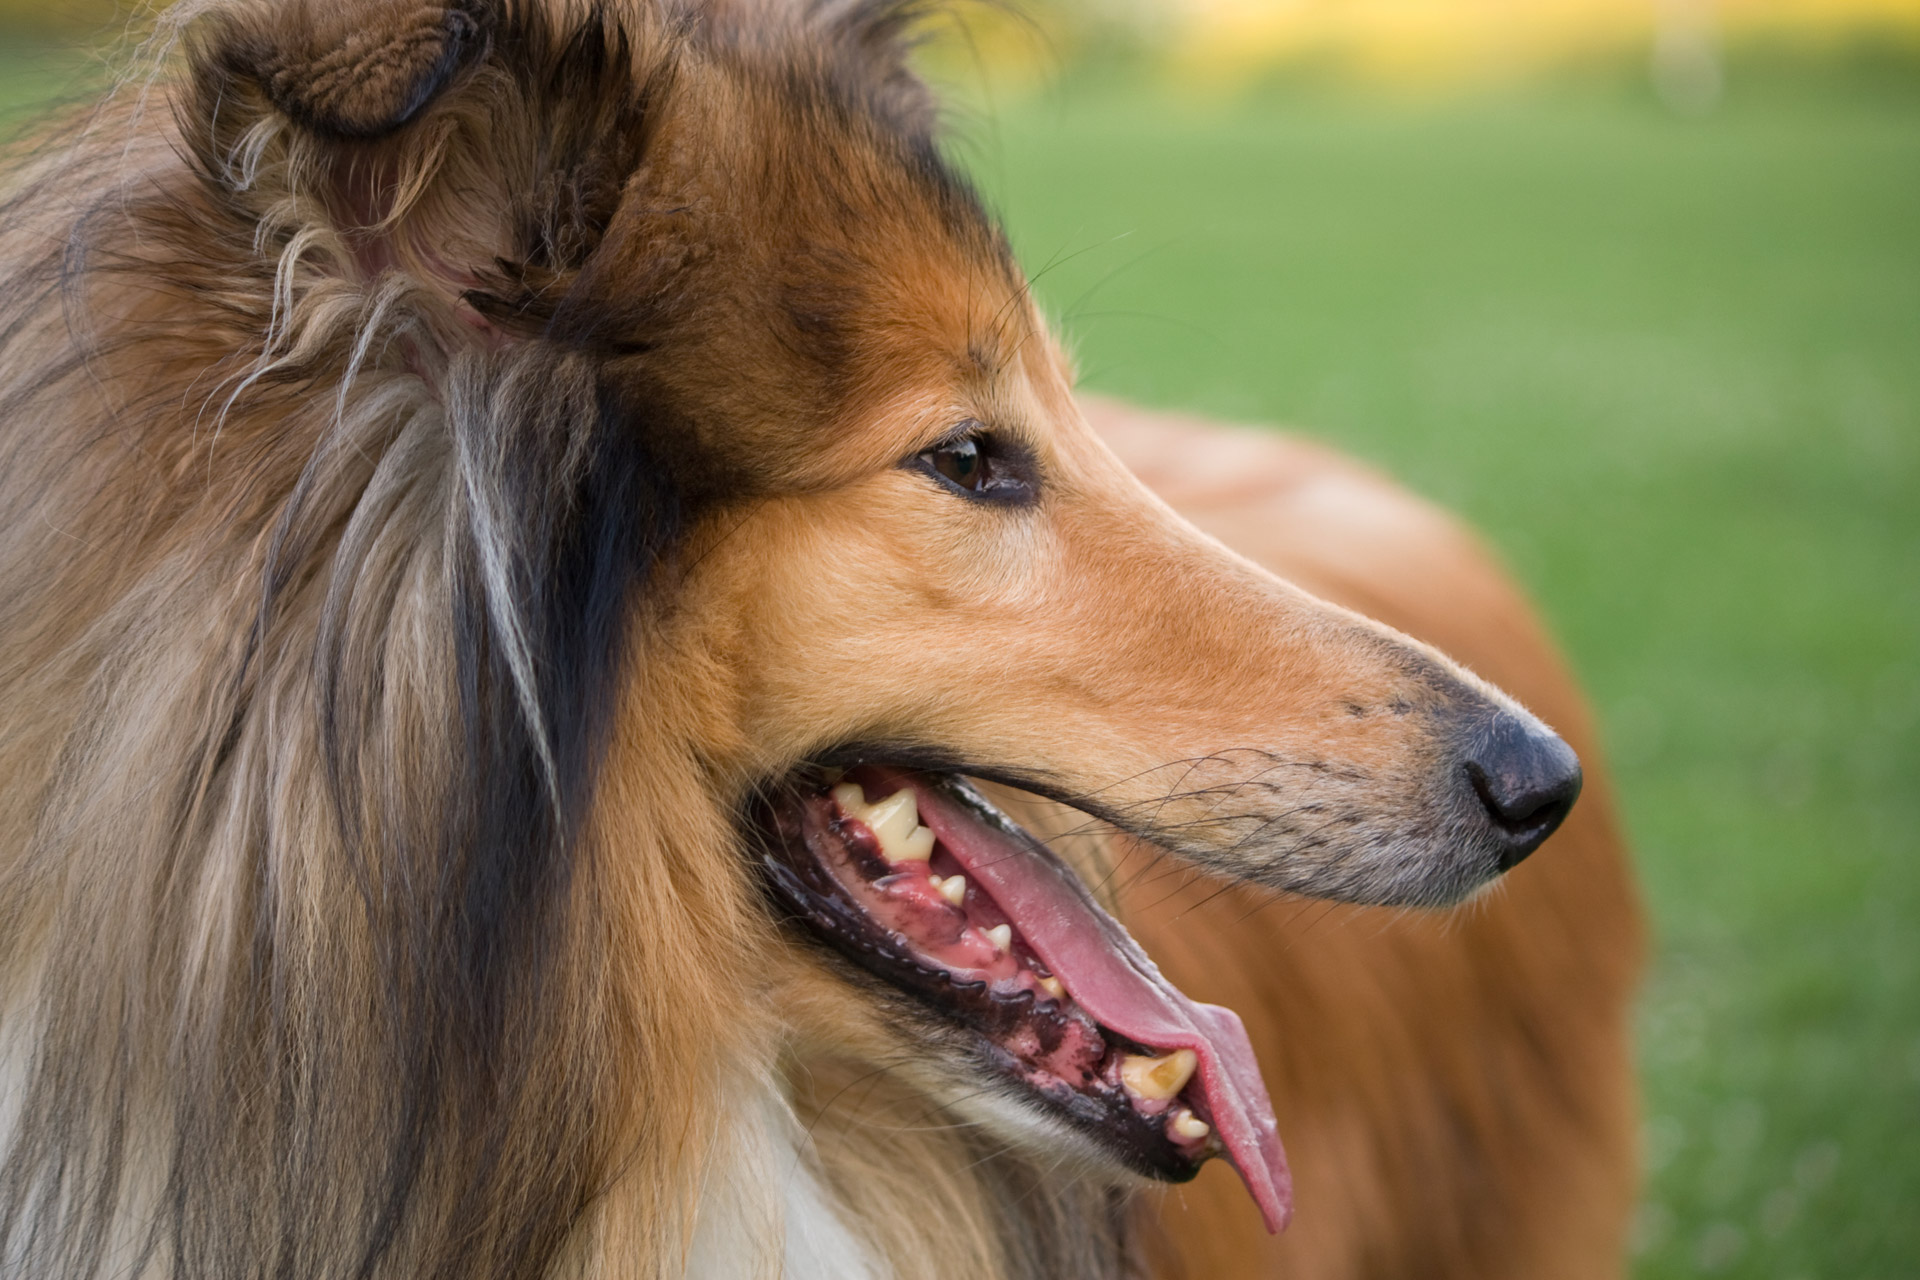 Beautiful close-up photo portrait of the head of a rough collie dog